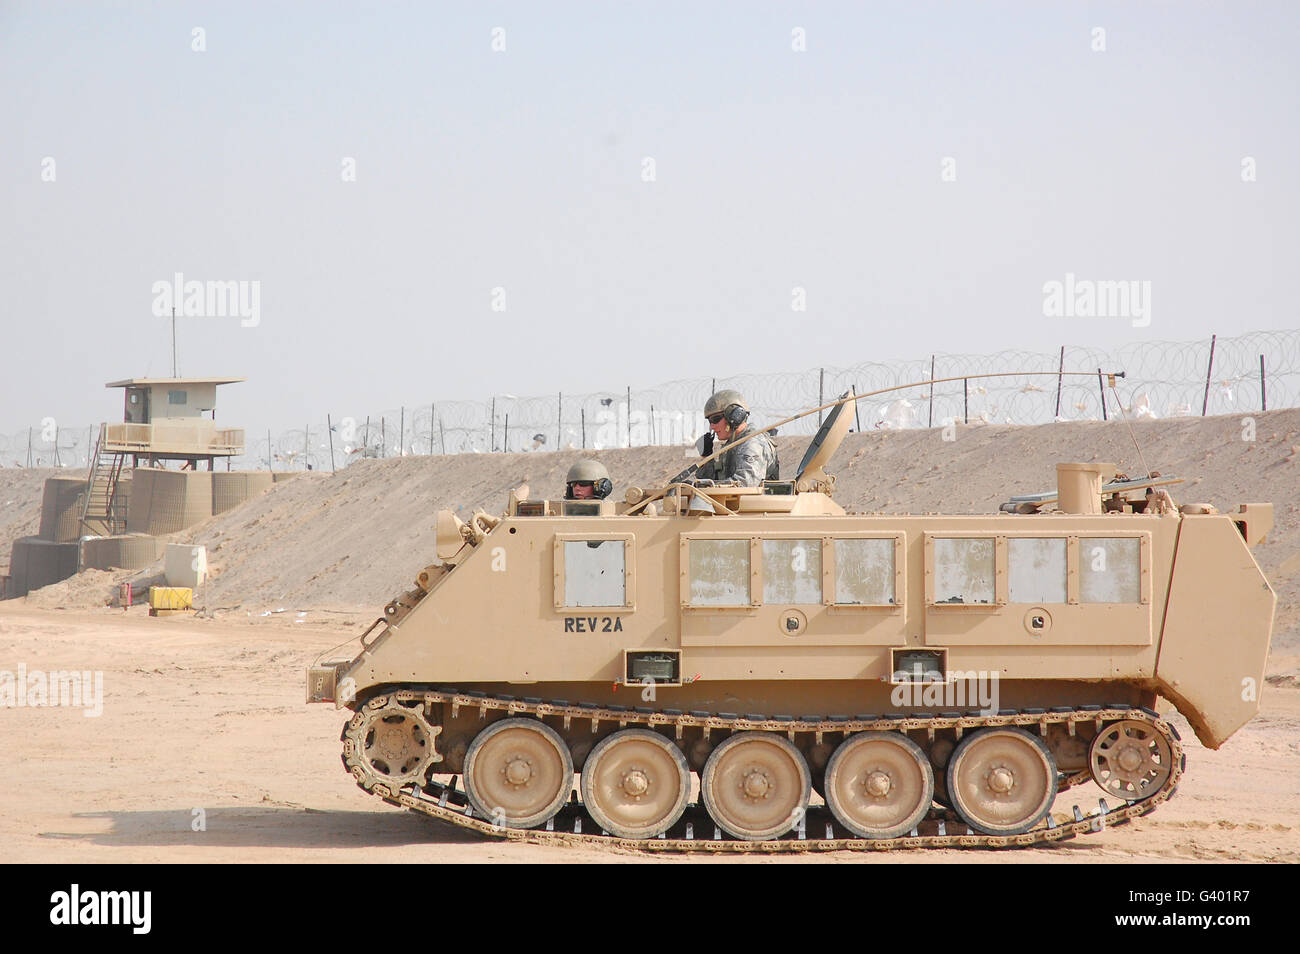 Soldiers patrol in an M-113 Armored Personnel Carrier. Stock Photo